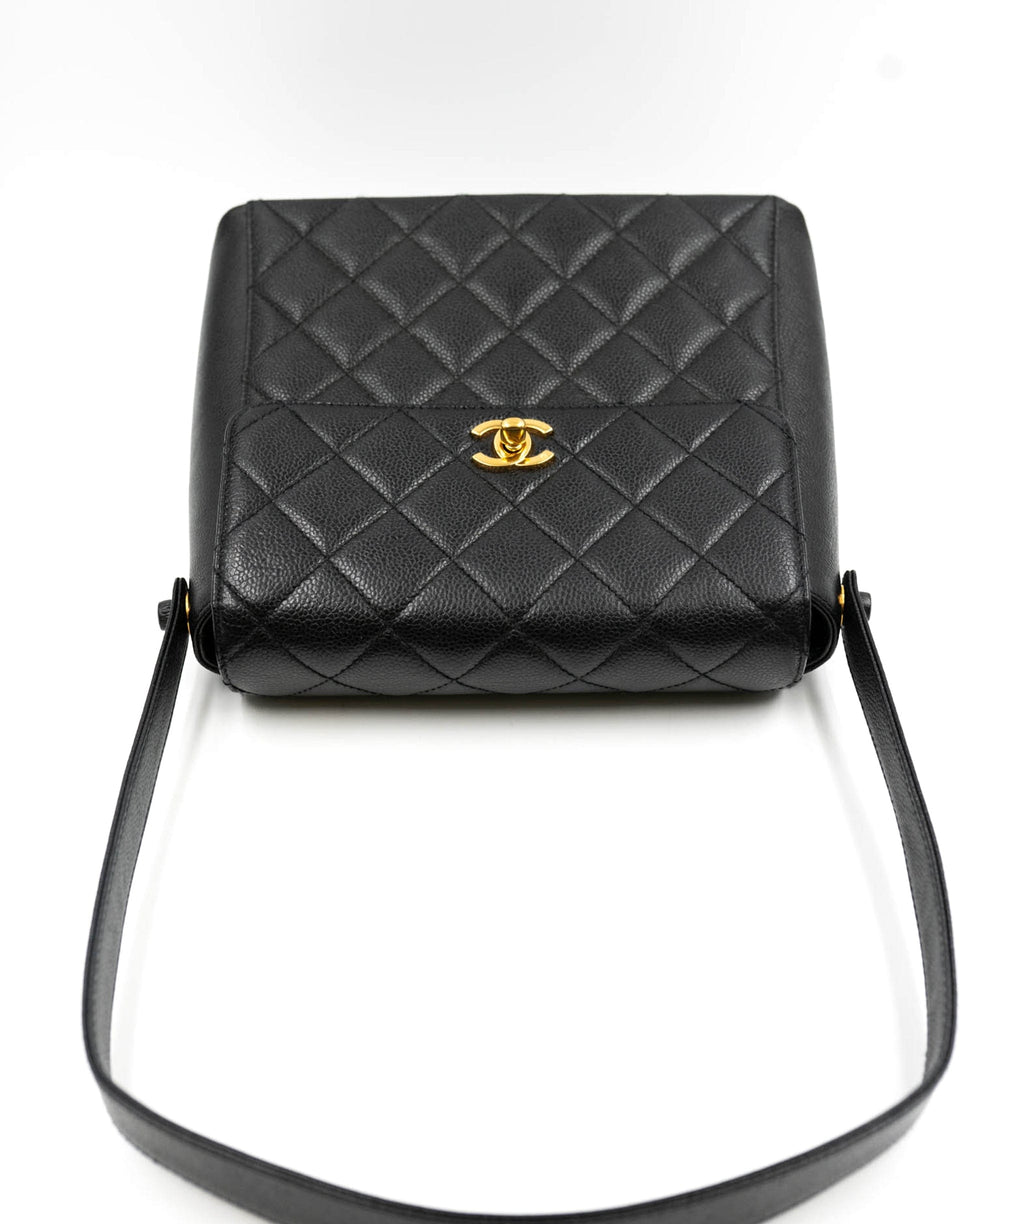 Pu Leather Adjustable Chanel Handbags, For Office at Rs 850/bag in Mumbai